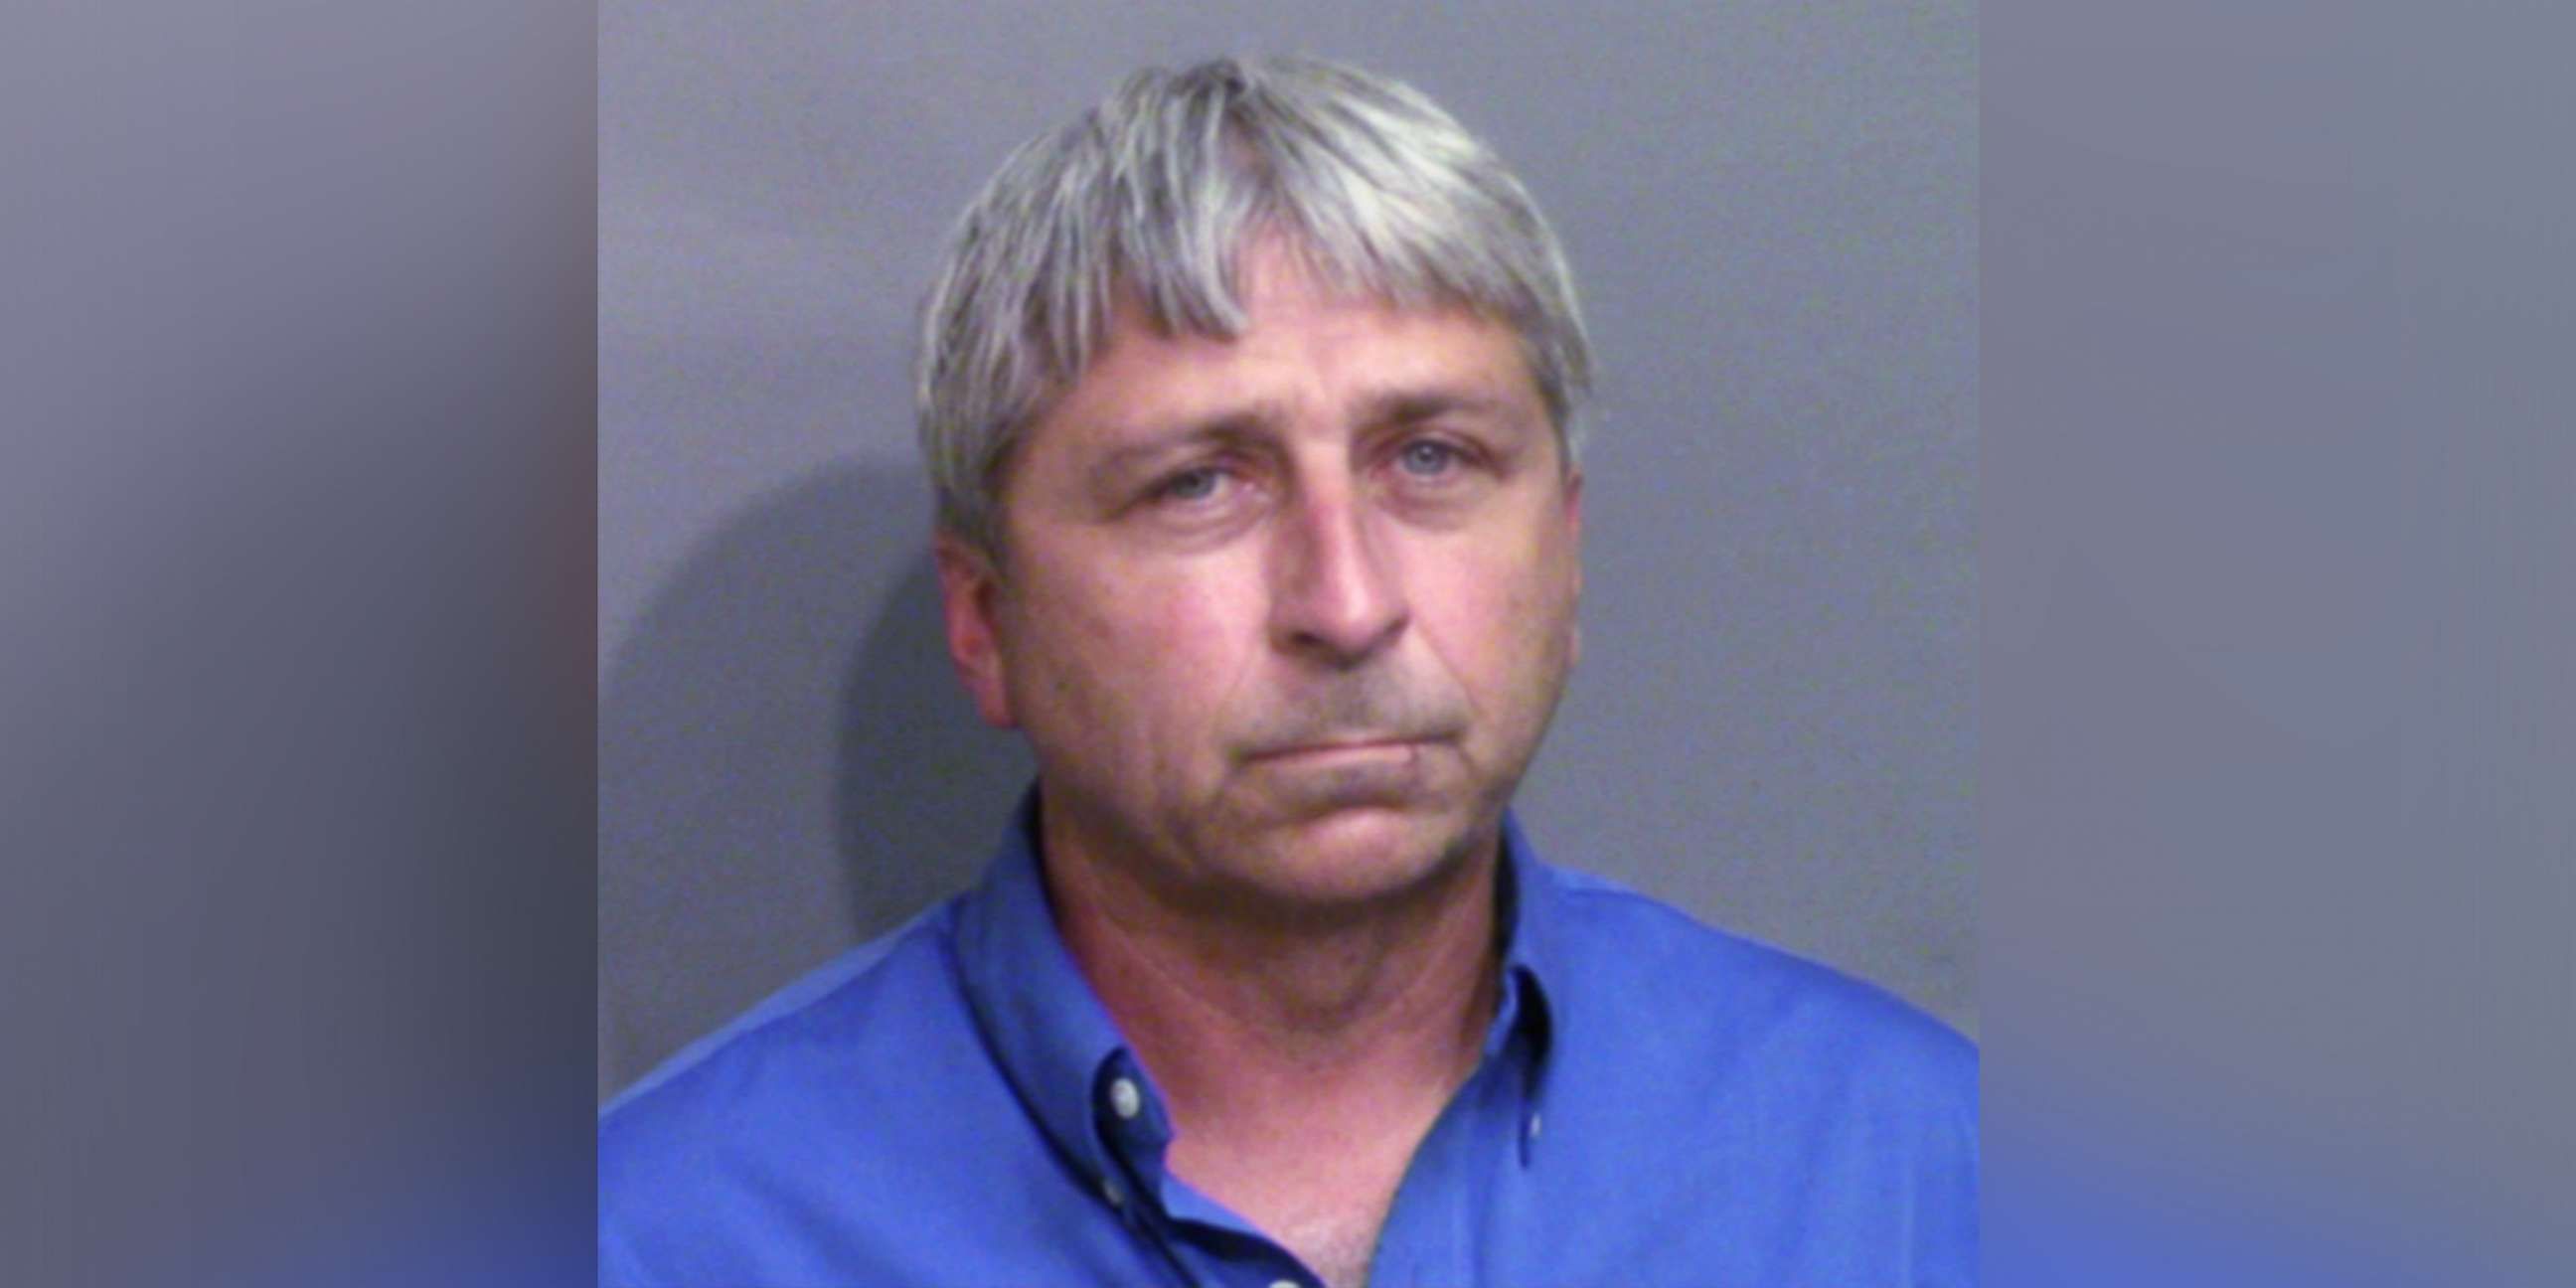 PHOTO: William Bryan, 50, is pictured in a booking photo released by the Glynn County Sheriff's Office in Brunswick, Ga.